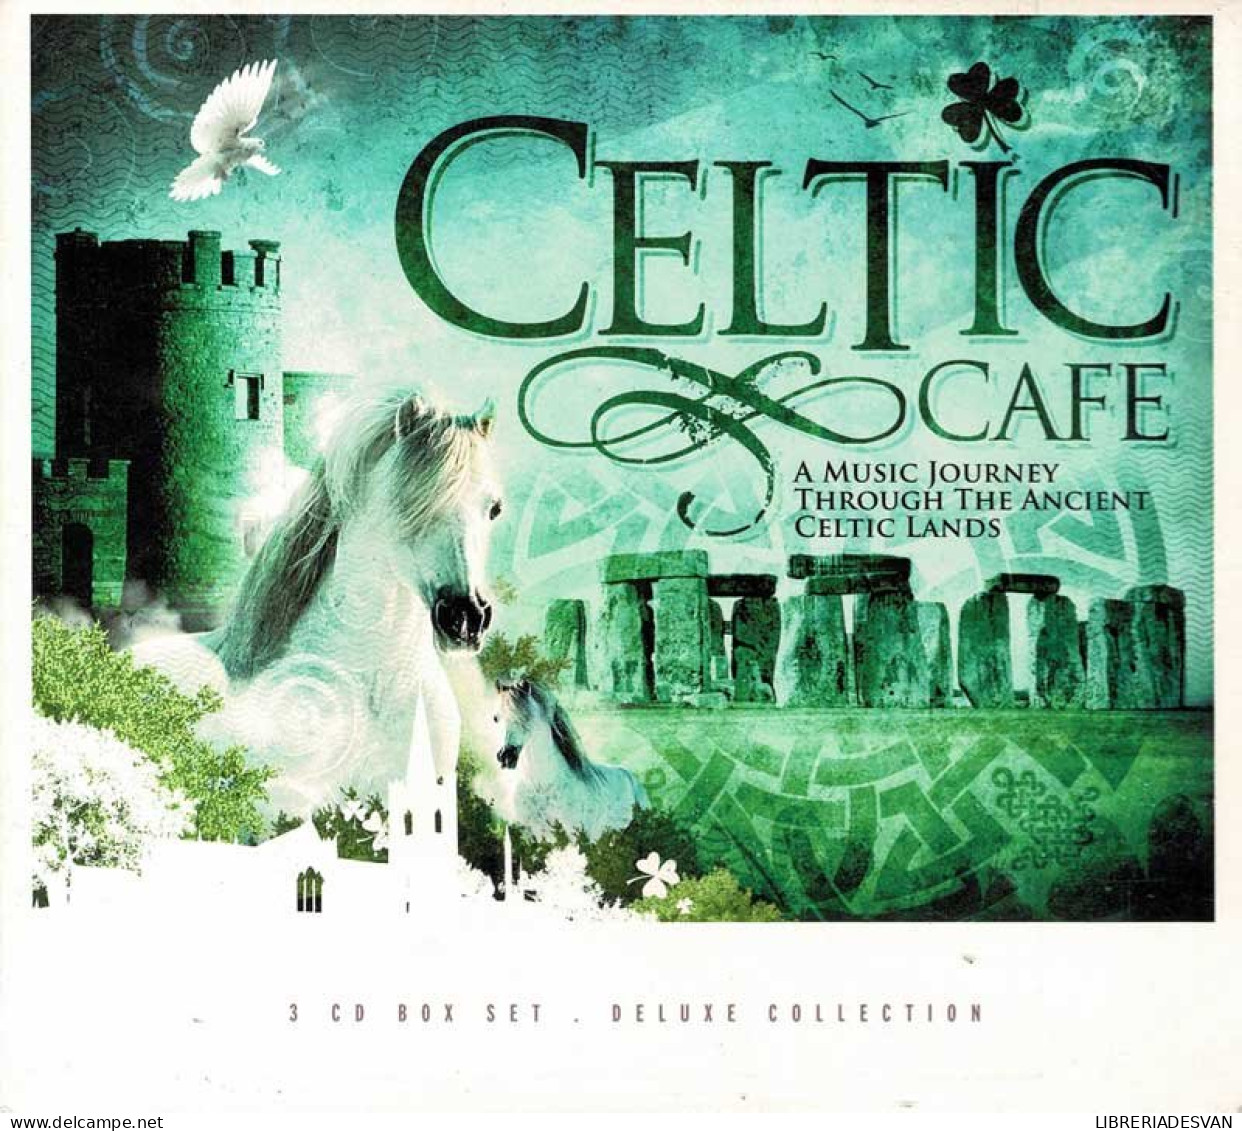 Celtic Cafe. Deluxe Collection. 3 X CD - Nueva Era (New Age)